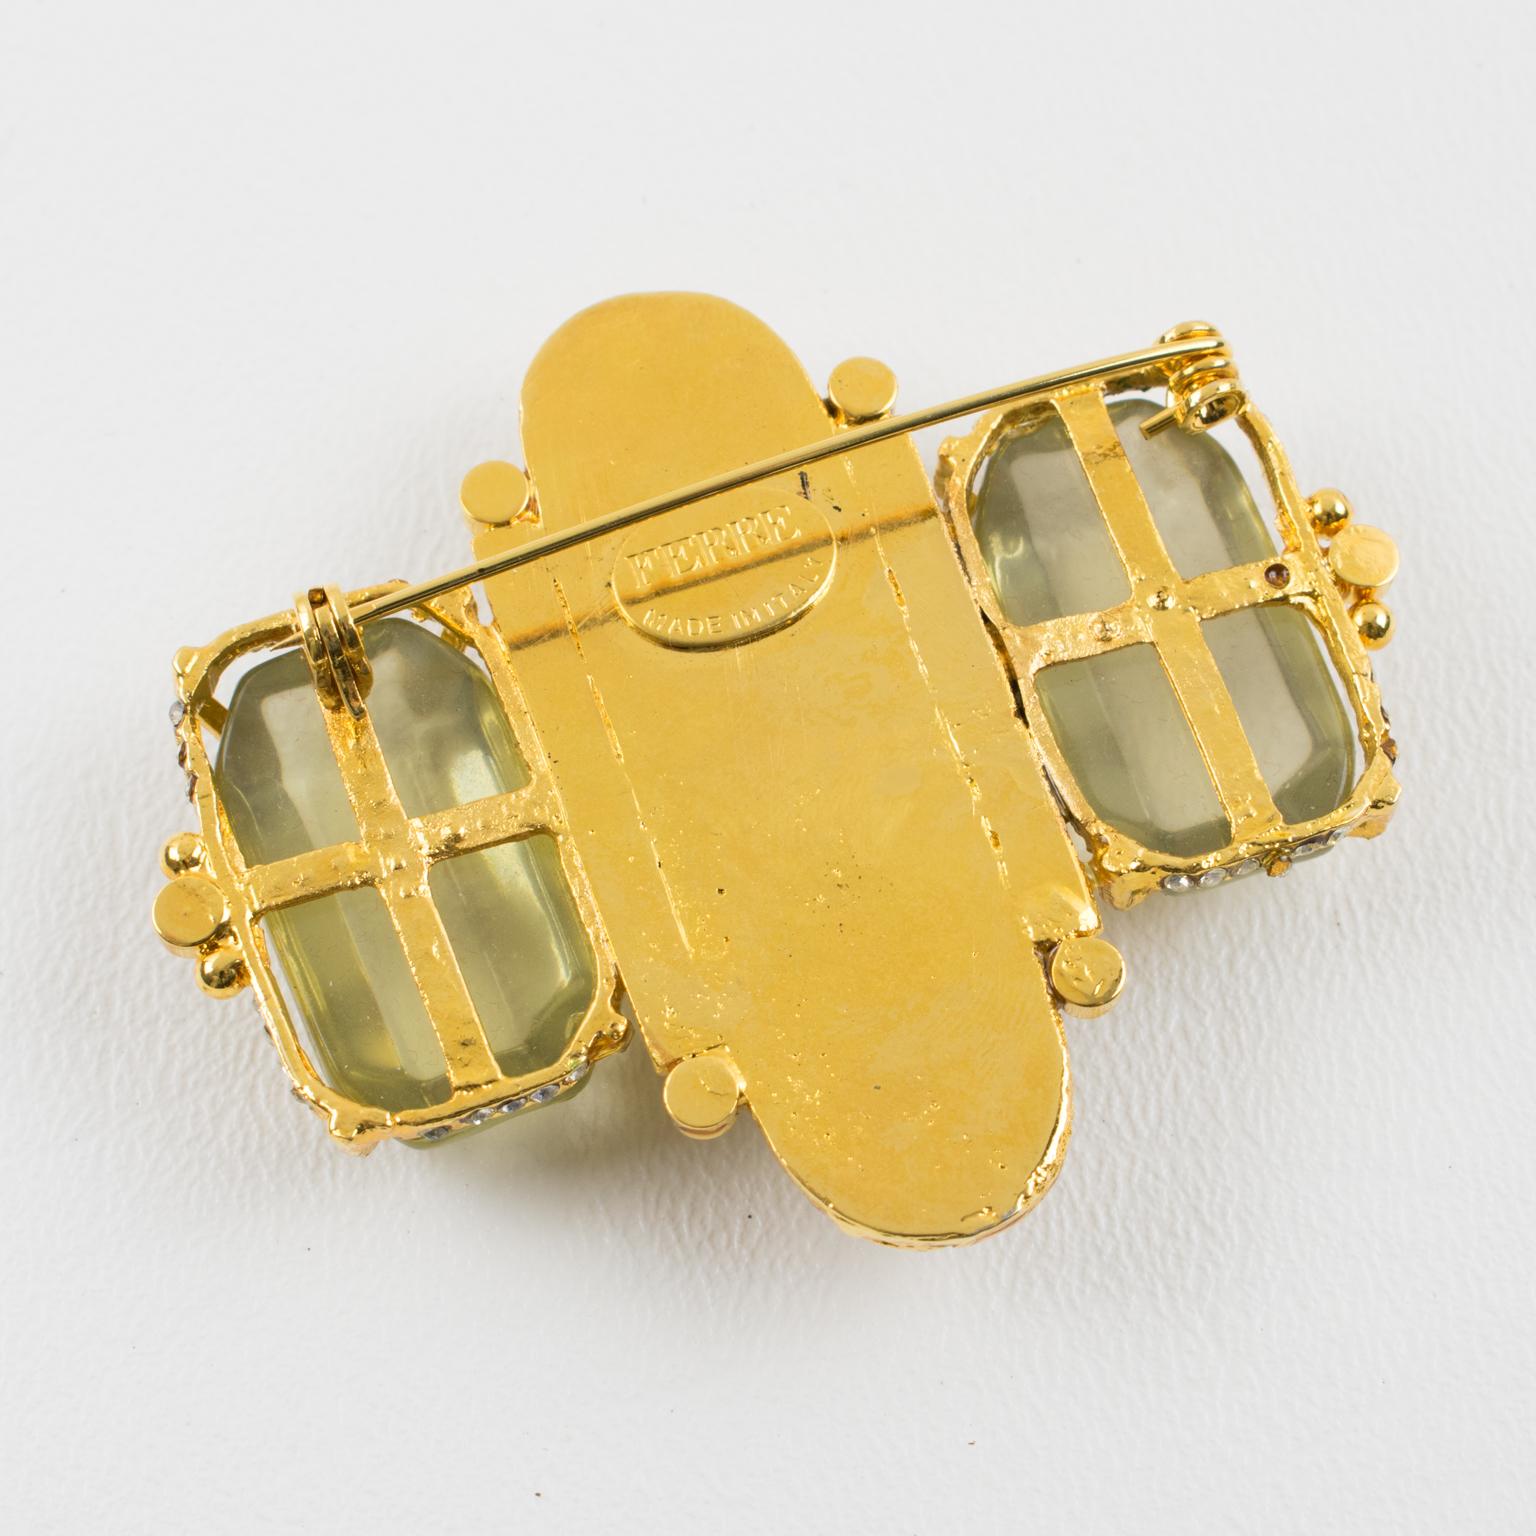 Gianfranco Ferre Jeweled and Champagne Resin Geometric Pin Brooch In Excellent Condition For Sale In Atlanta, GA